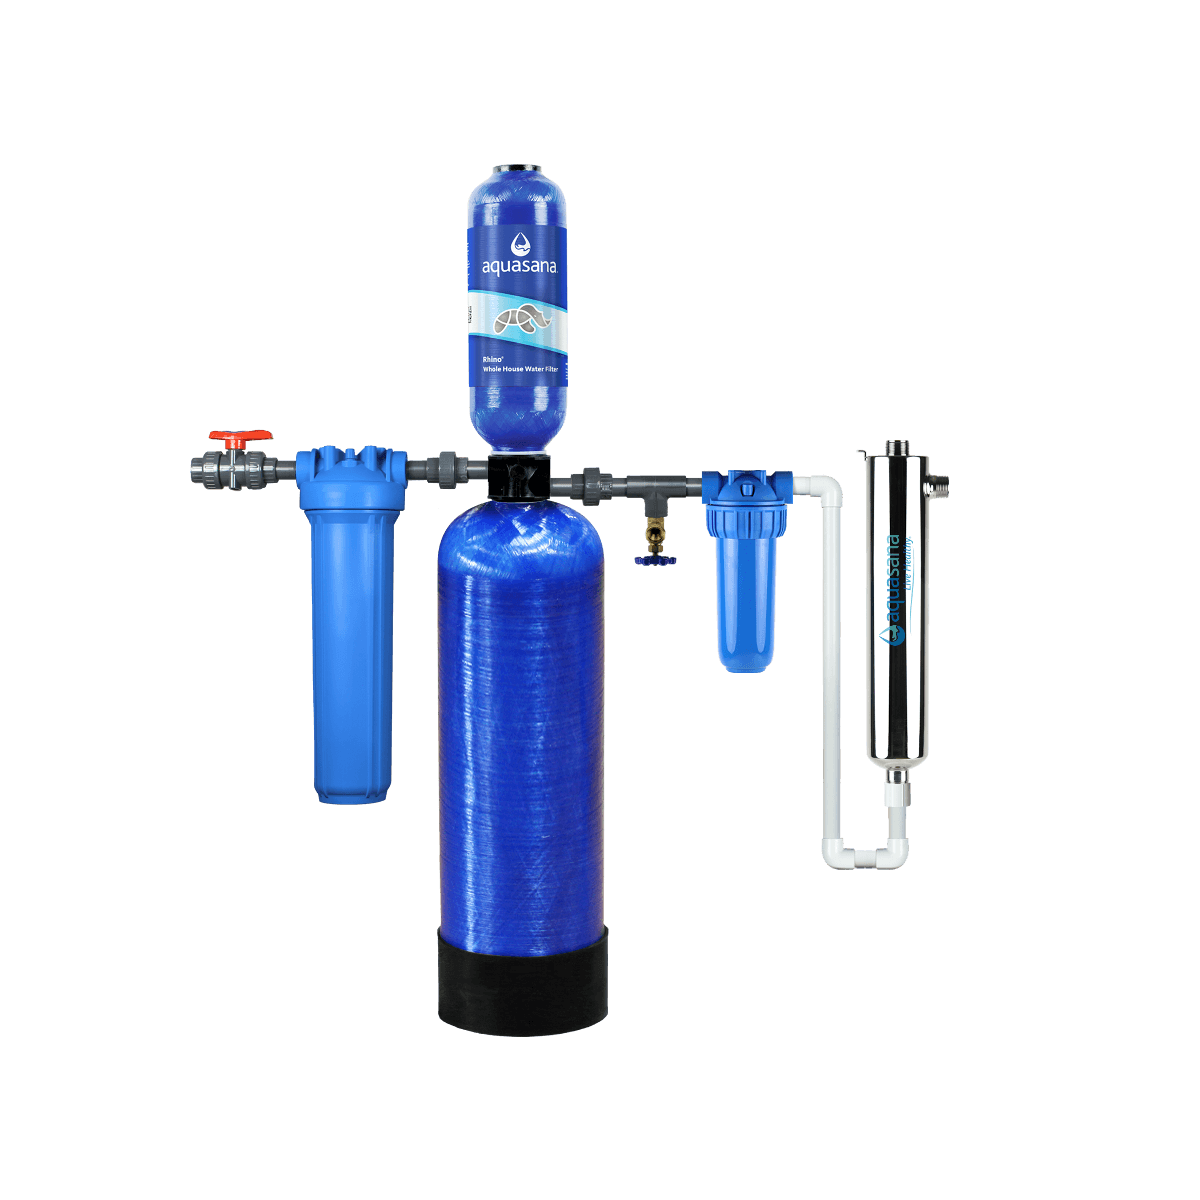 Rhino® Max Flow Whole House Water UV Filter System Home Water Filtration Removes 99% of Bacteria & Viruses Aquasana